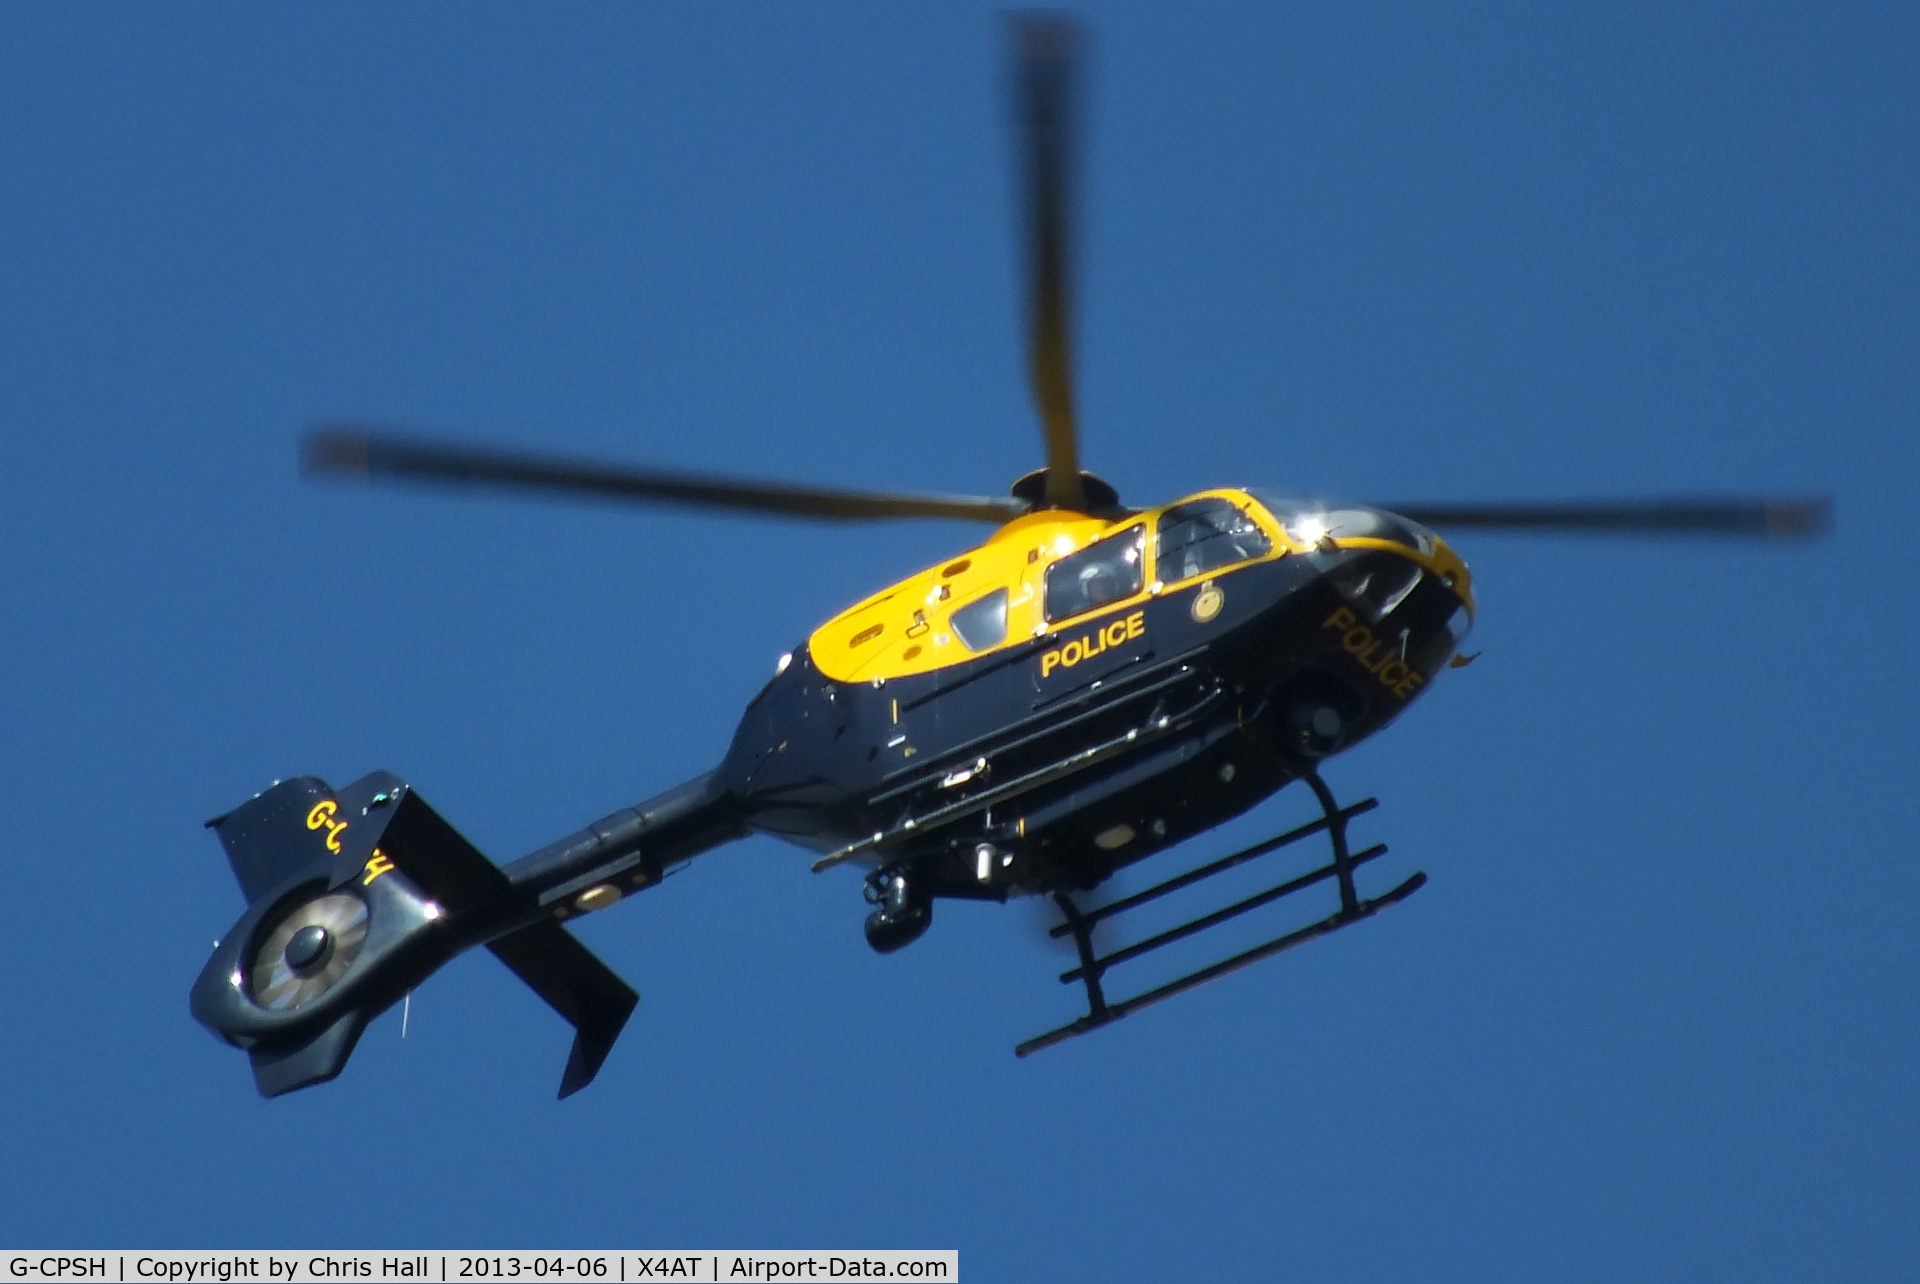 G-CPSH, 2001 Eurocopter EC-135T-2+ C/N 0209, Police helicopter at the 2013 Grand National, Aintree